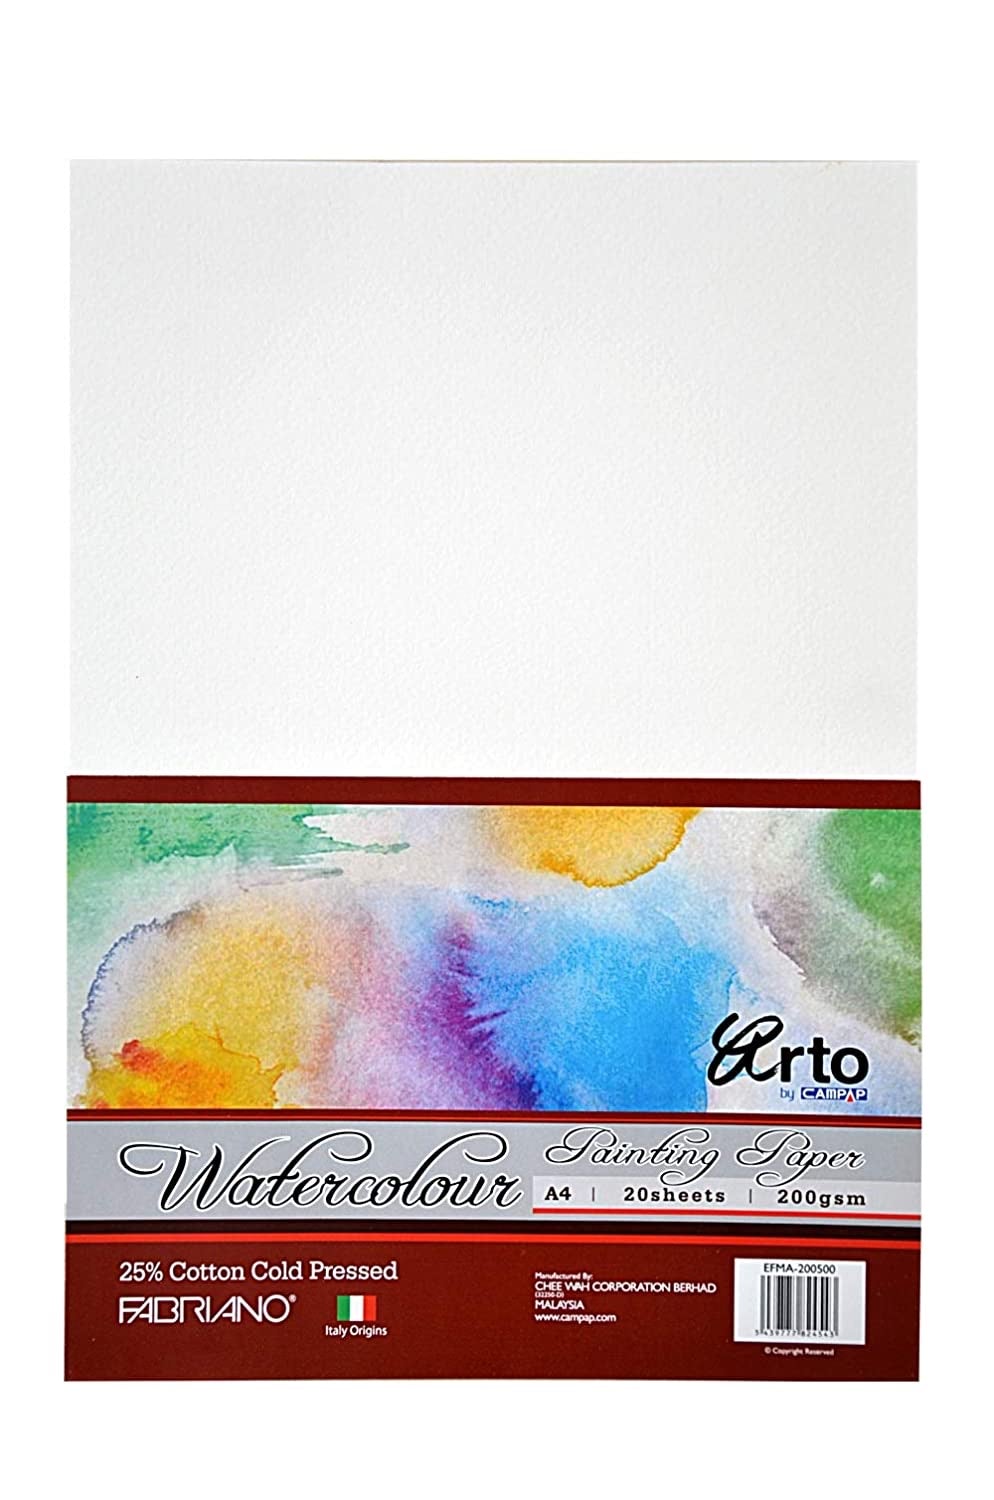 Campap Fabriano Watercolour Paper Pack of 20 Sheets (25% Cotton, Cold Pressed) 200 GSM, A4 - SCOOBOO - Loose Sheets